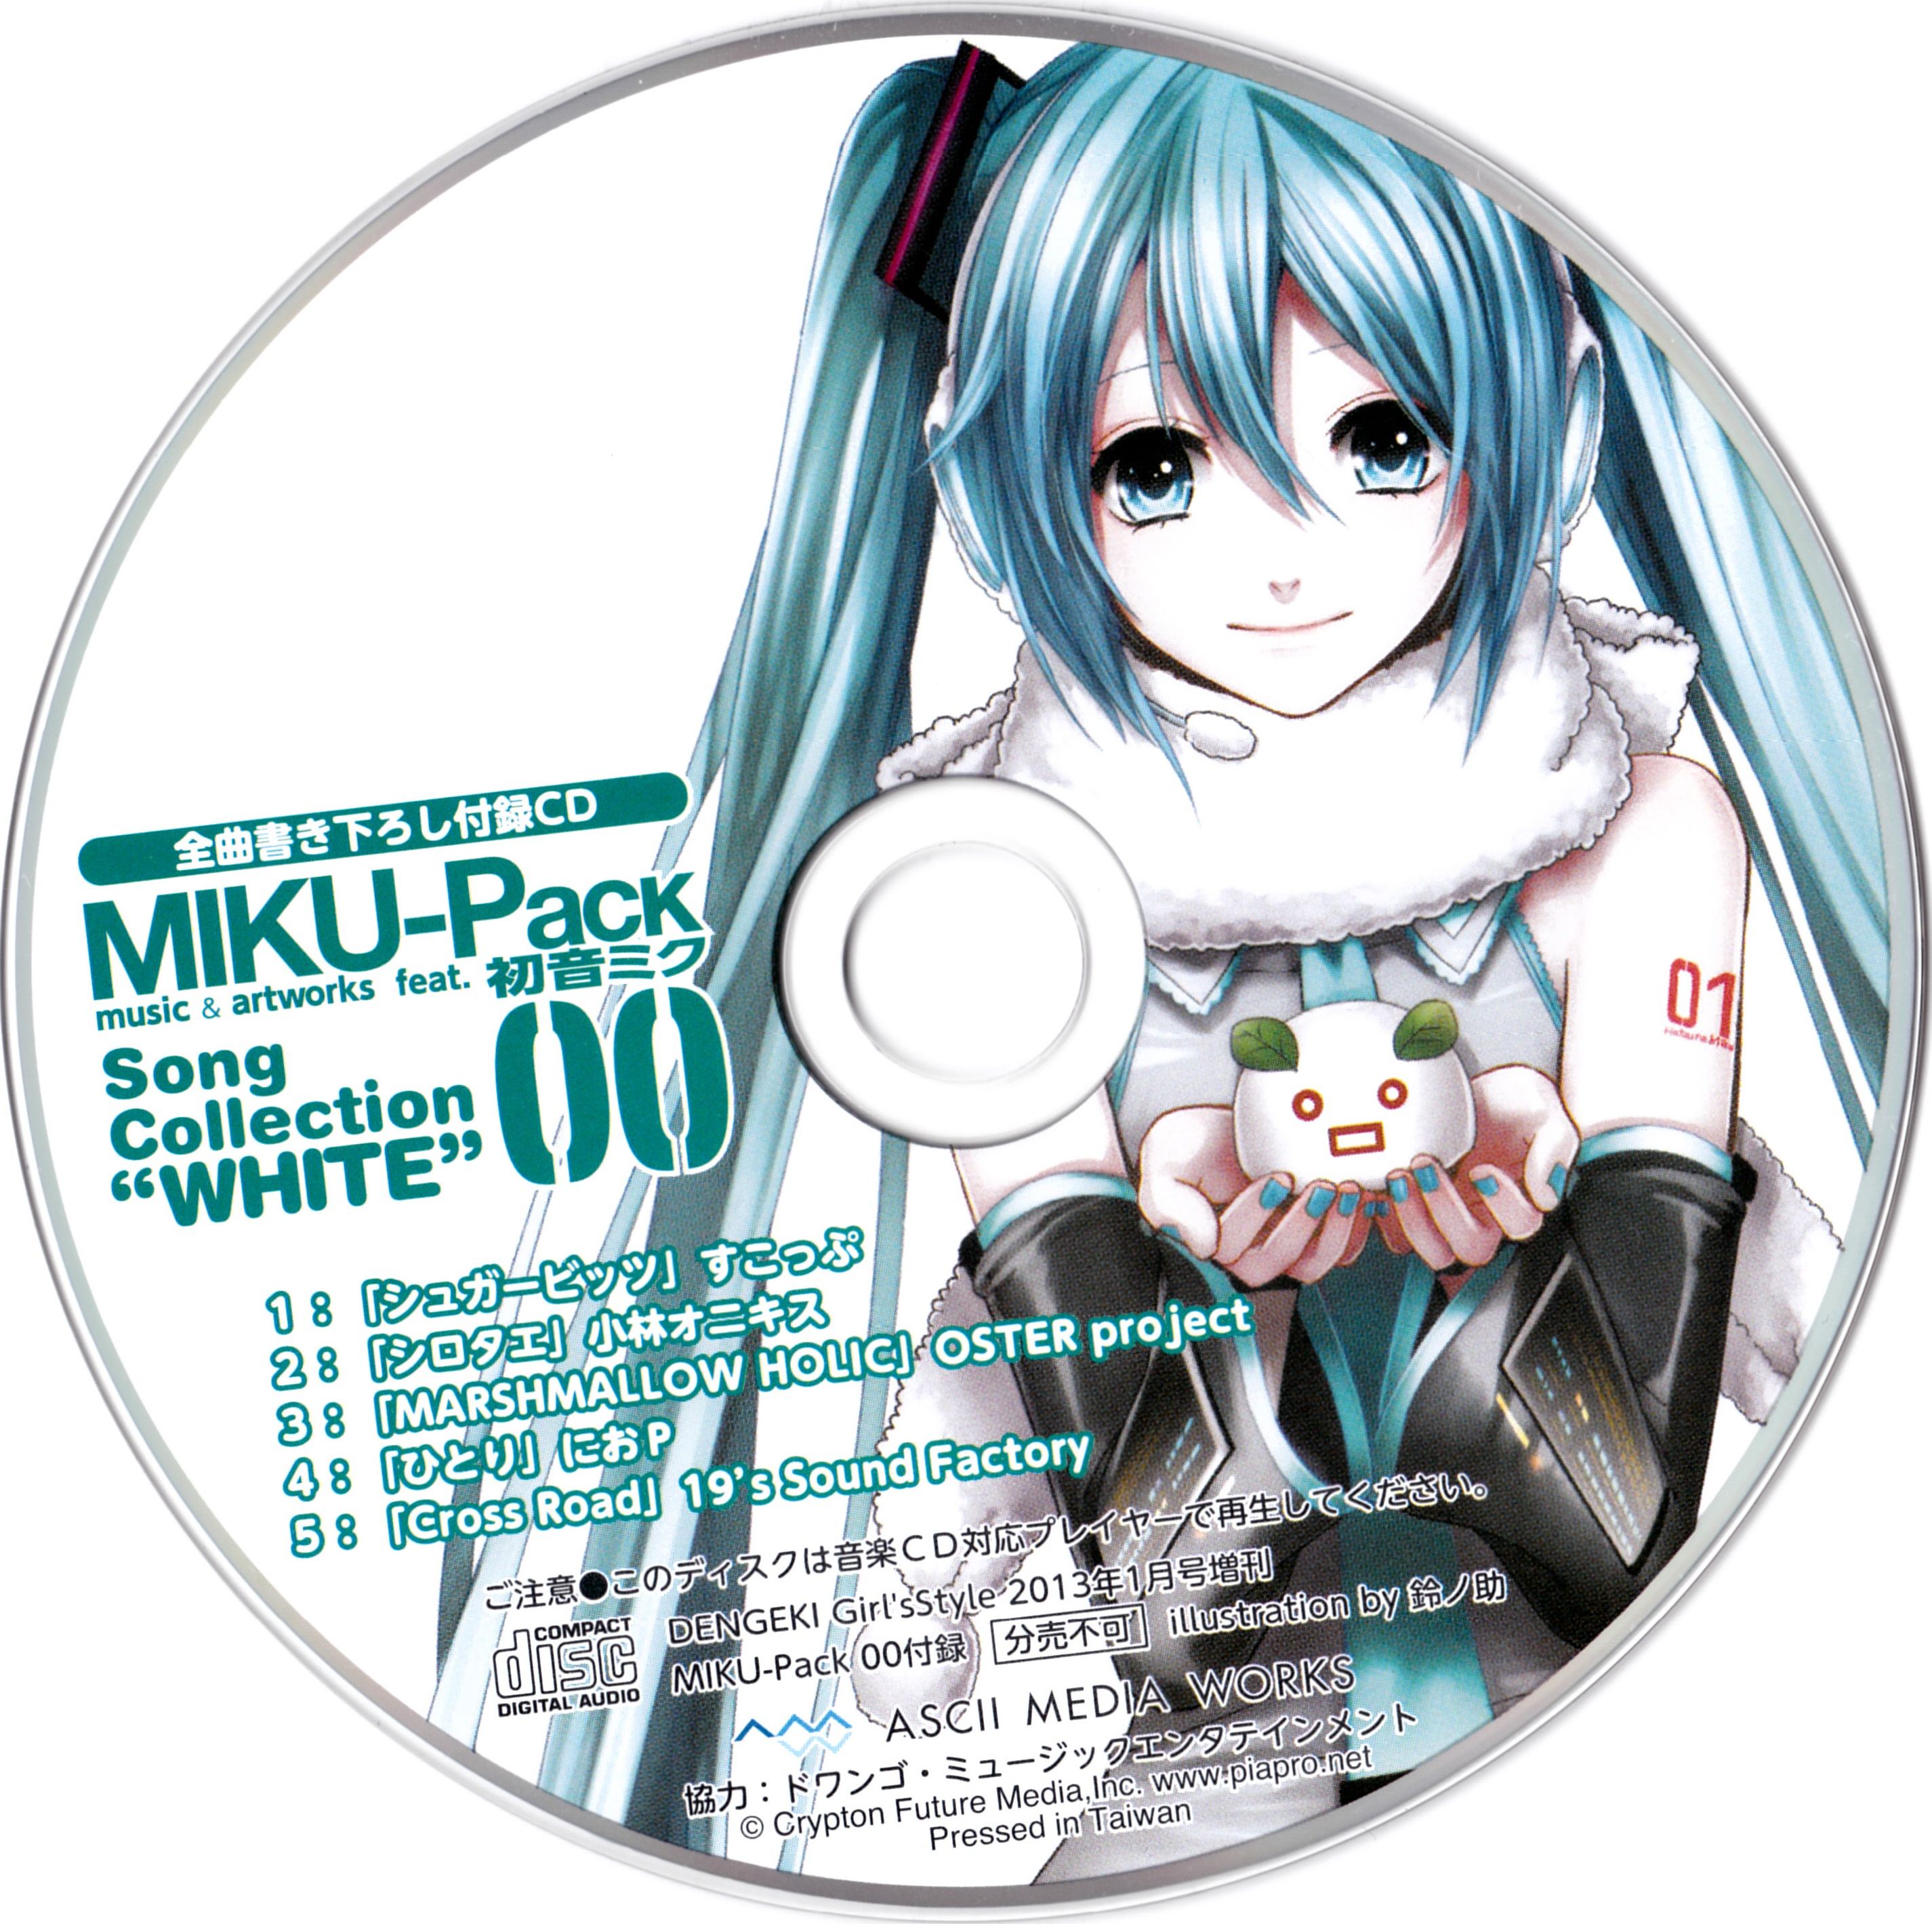 MIKU-Pack 00 Song Collection 